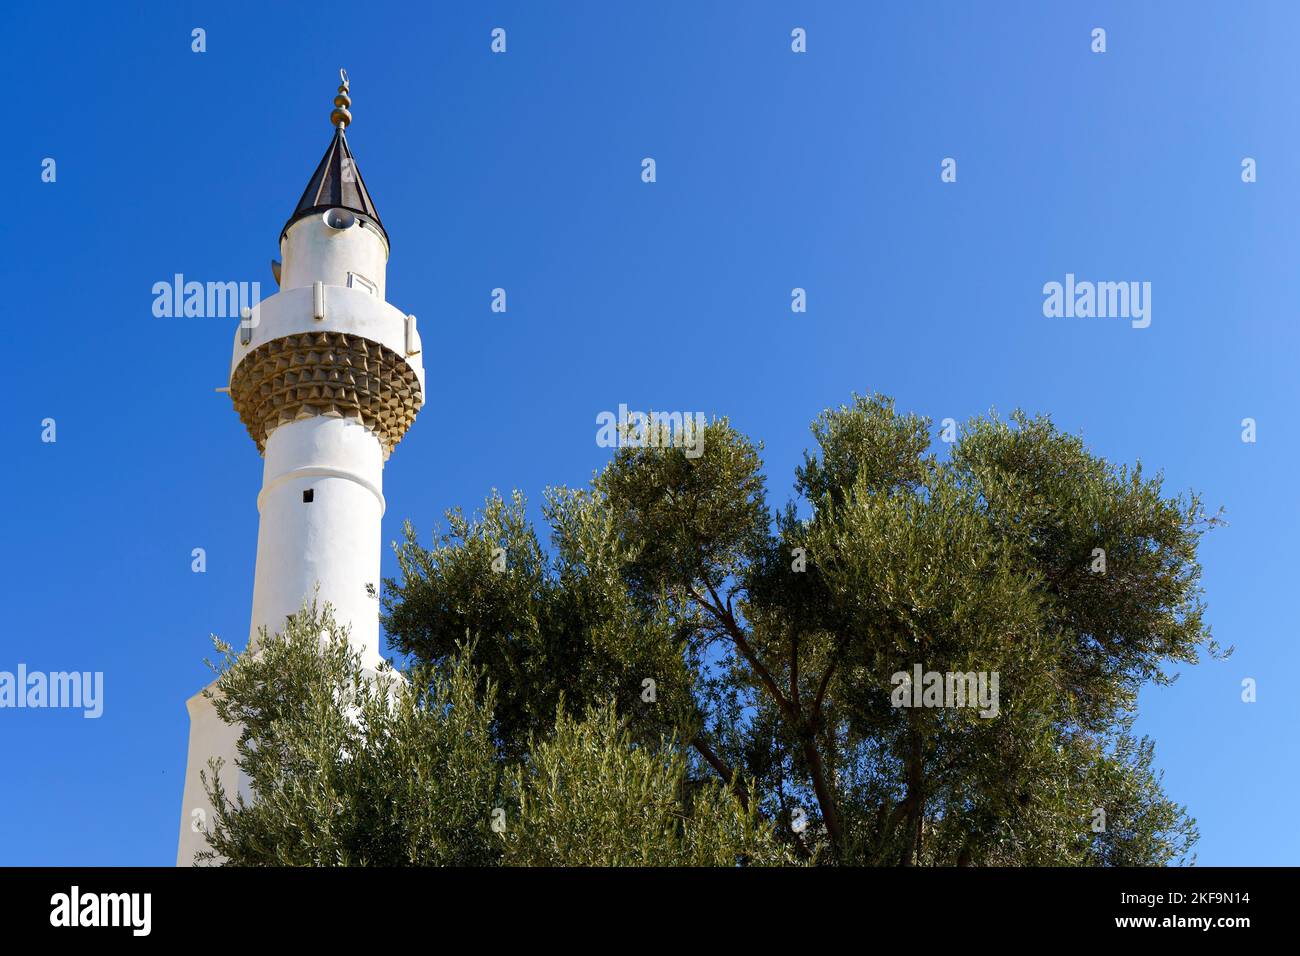 Architecture of an Islamic mosque in Turkey against the backdrop of a sunny sky background. Minaret of a Muslim mosque with a blue dome. High quality photo Stock Photo